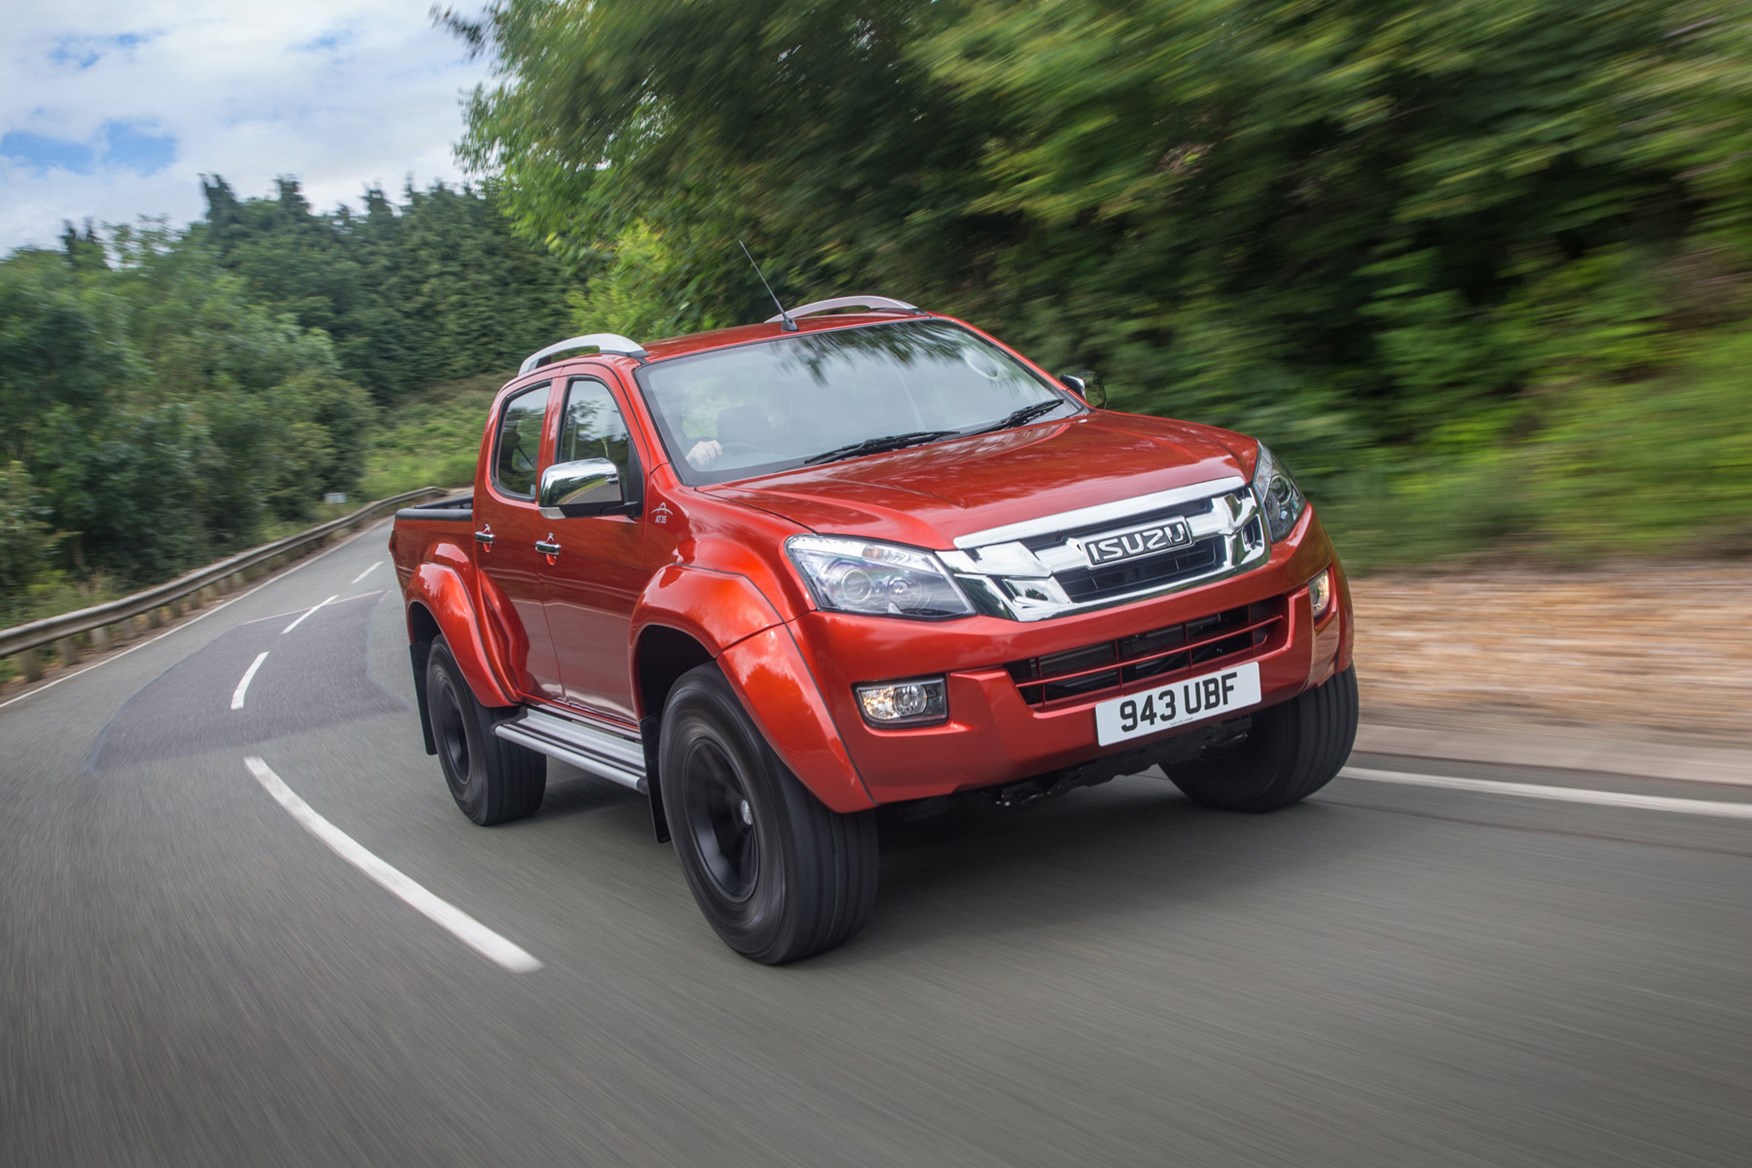 Isuzu D-Max full review on Parkers Vans - AT35 variant exterior